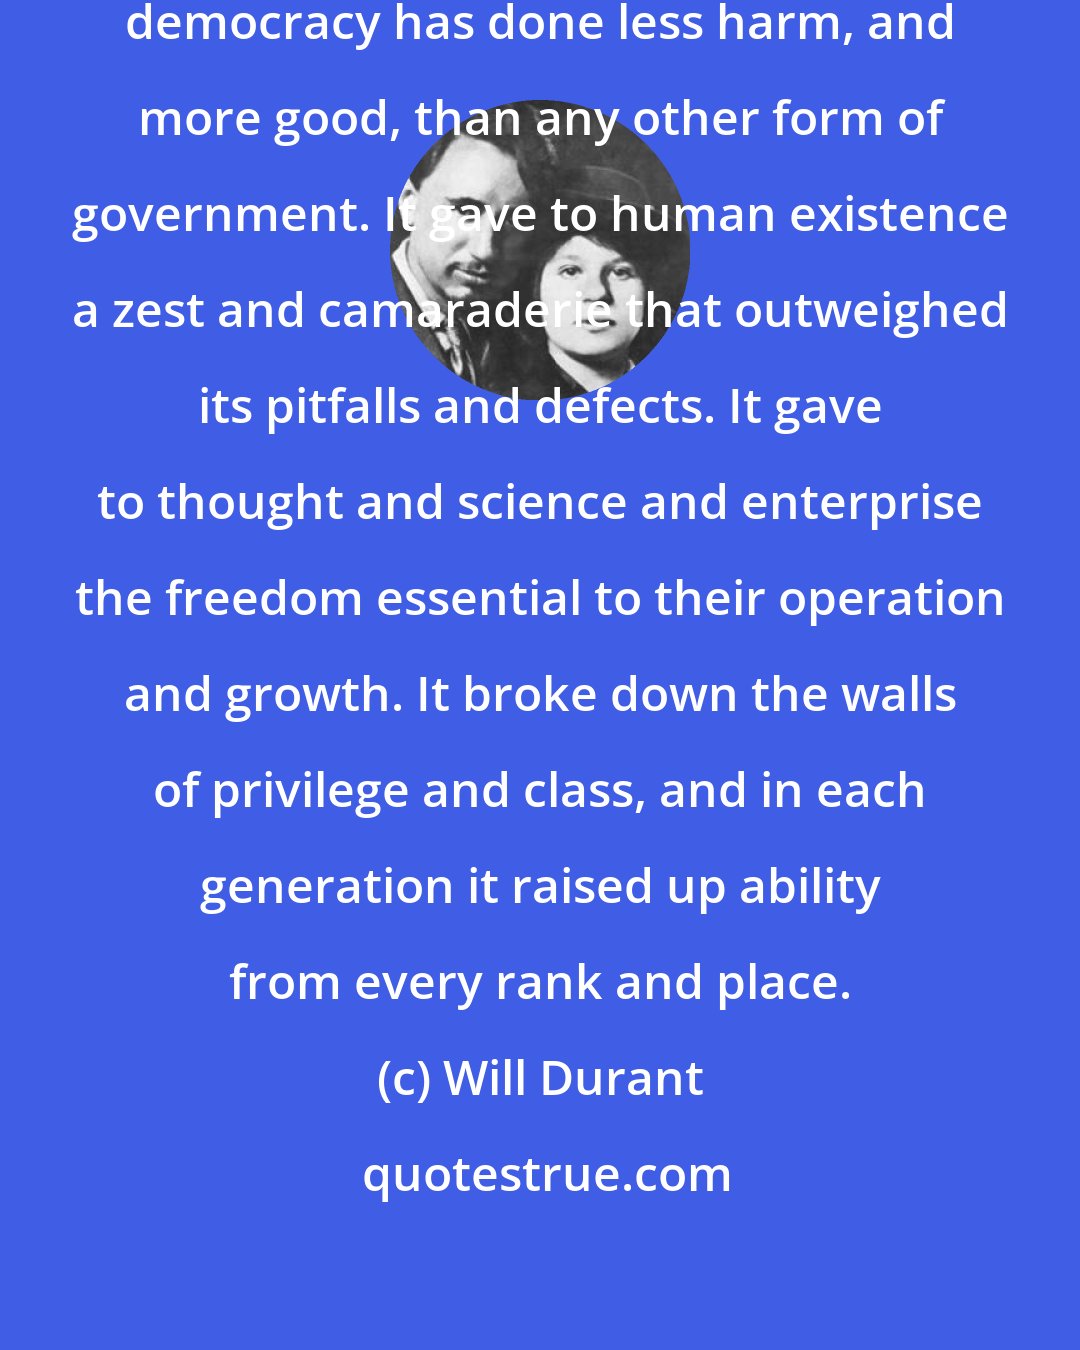 Will Durant: All deductions having been made, democracy has done less harm, and more good, than any other form of government. It gave to human existence a zest and camaraderie that outweighed its pitfalls and defects. It gave to thought and science and enterprise the freedom essential to their operation and growth. It broke down the walls of privilege and class, and in each generation it raised up ability from every rank and place.